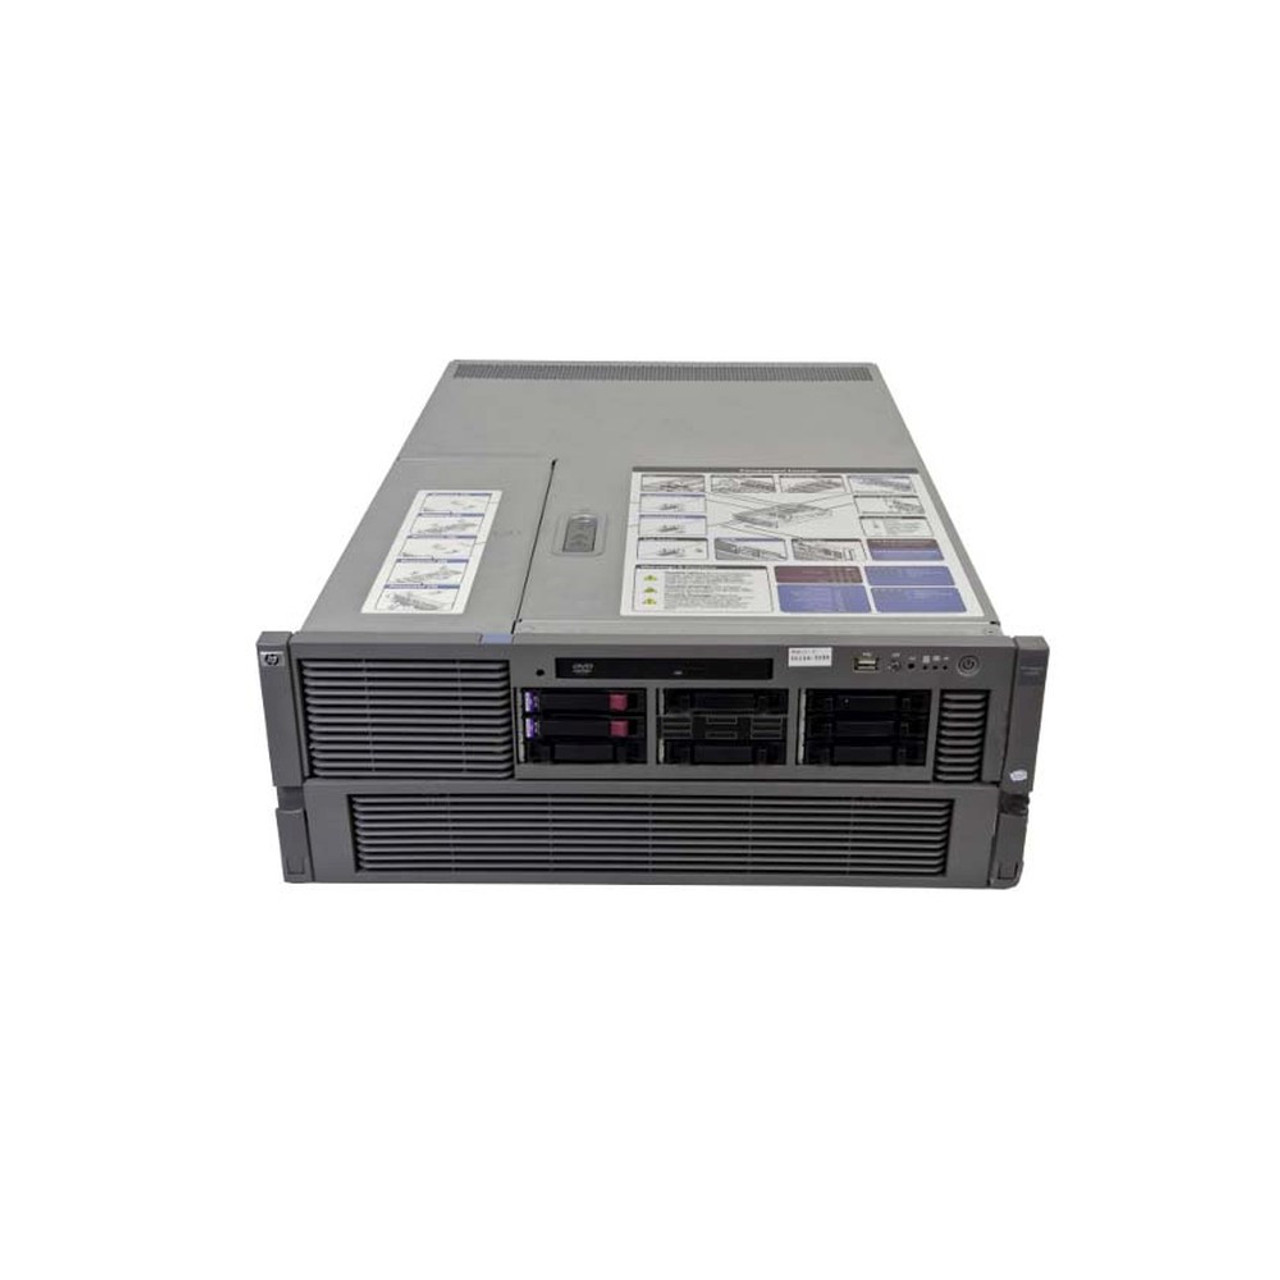 AD132A #160 HP rx6600 Server - Custom To Order